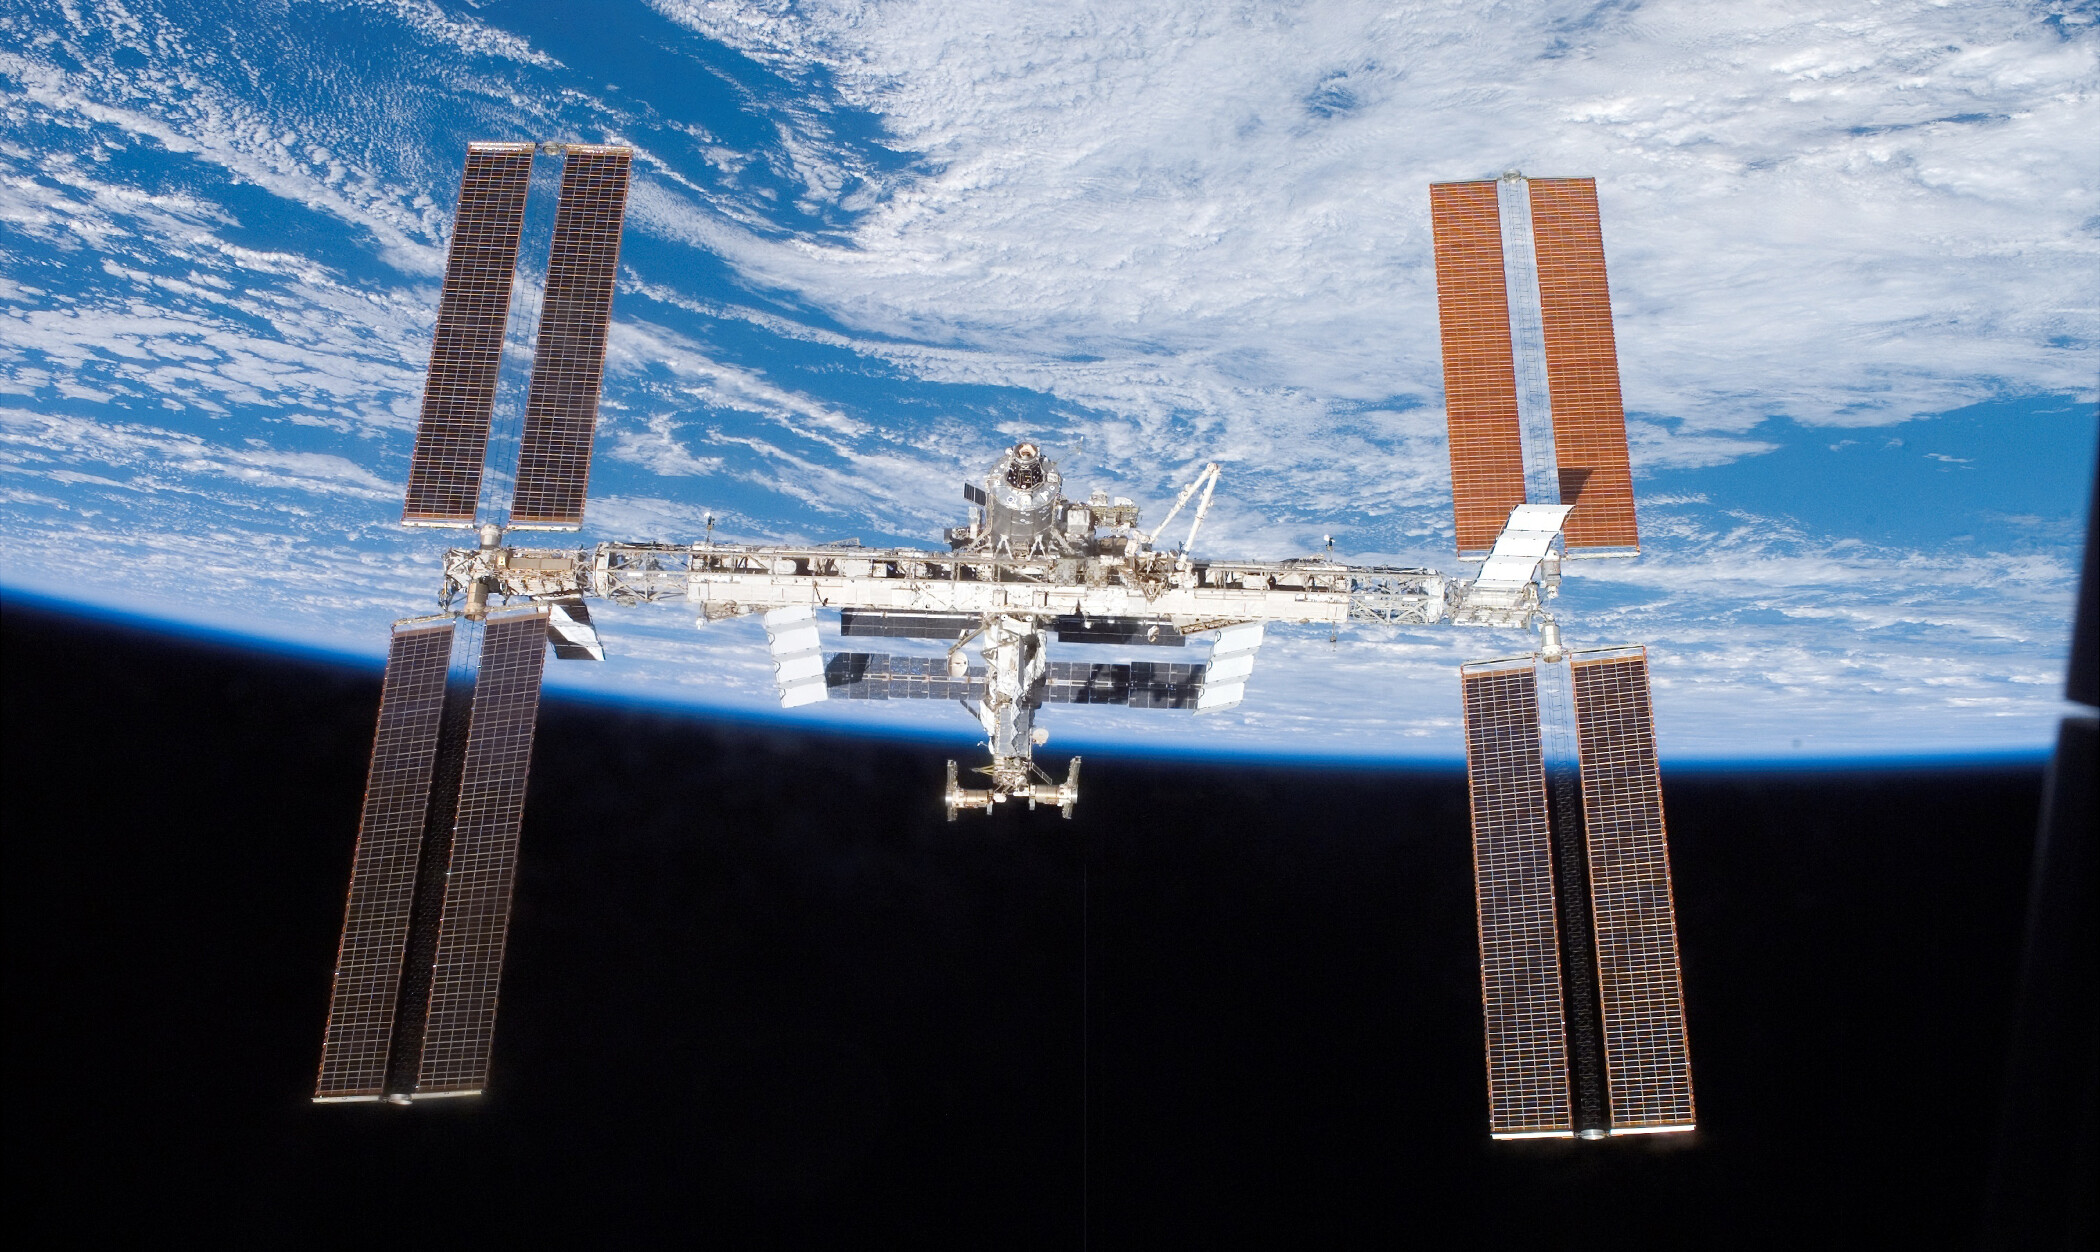 International Space Station: Scientific and engineering collaboration among five space agencies, NASA, Roscosmos, JAXA. 2100x1260 HD Background.